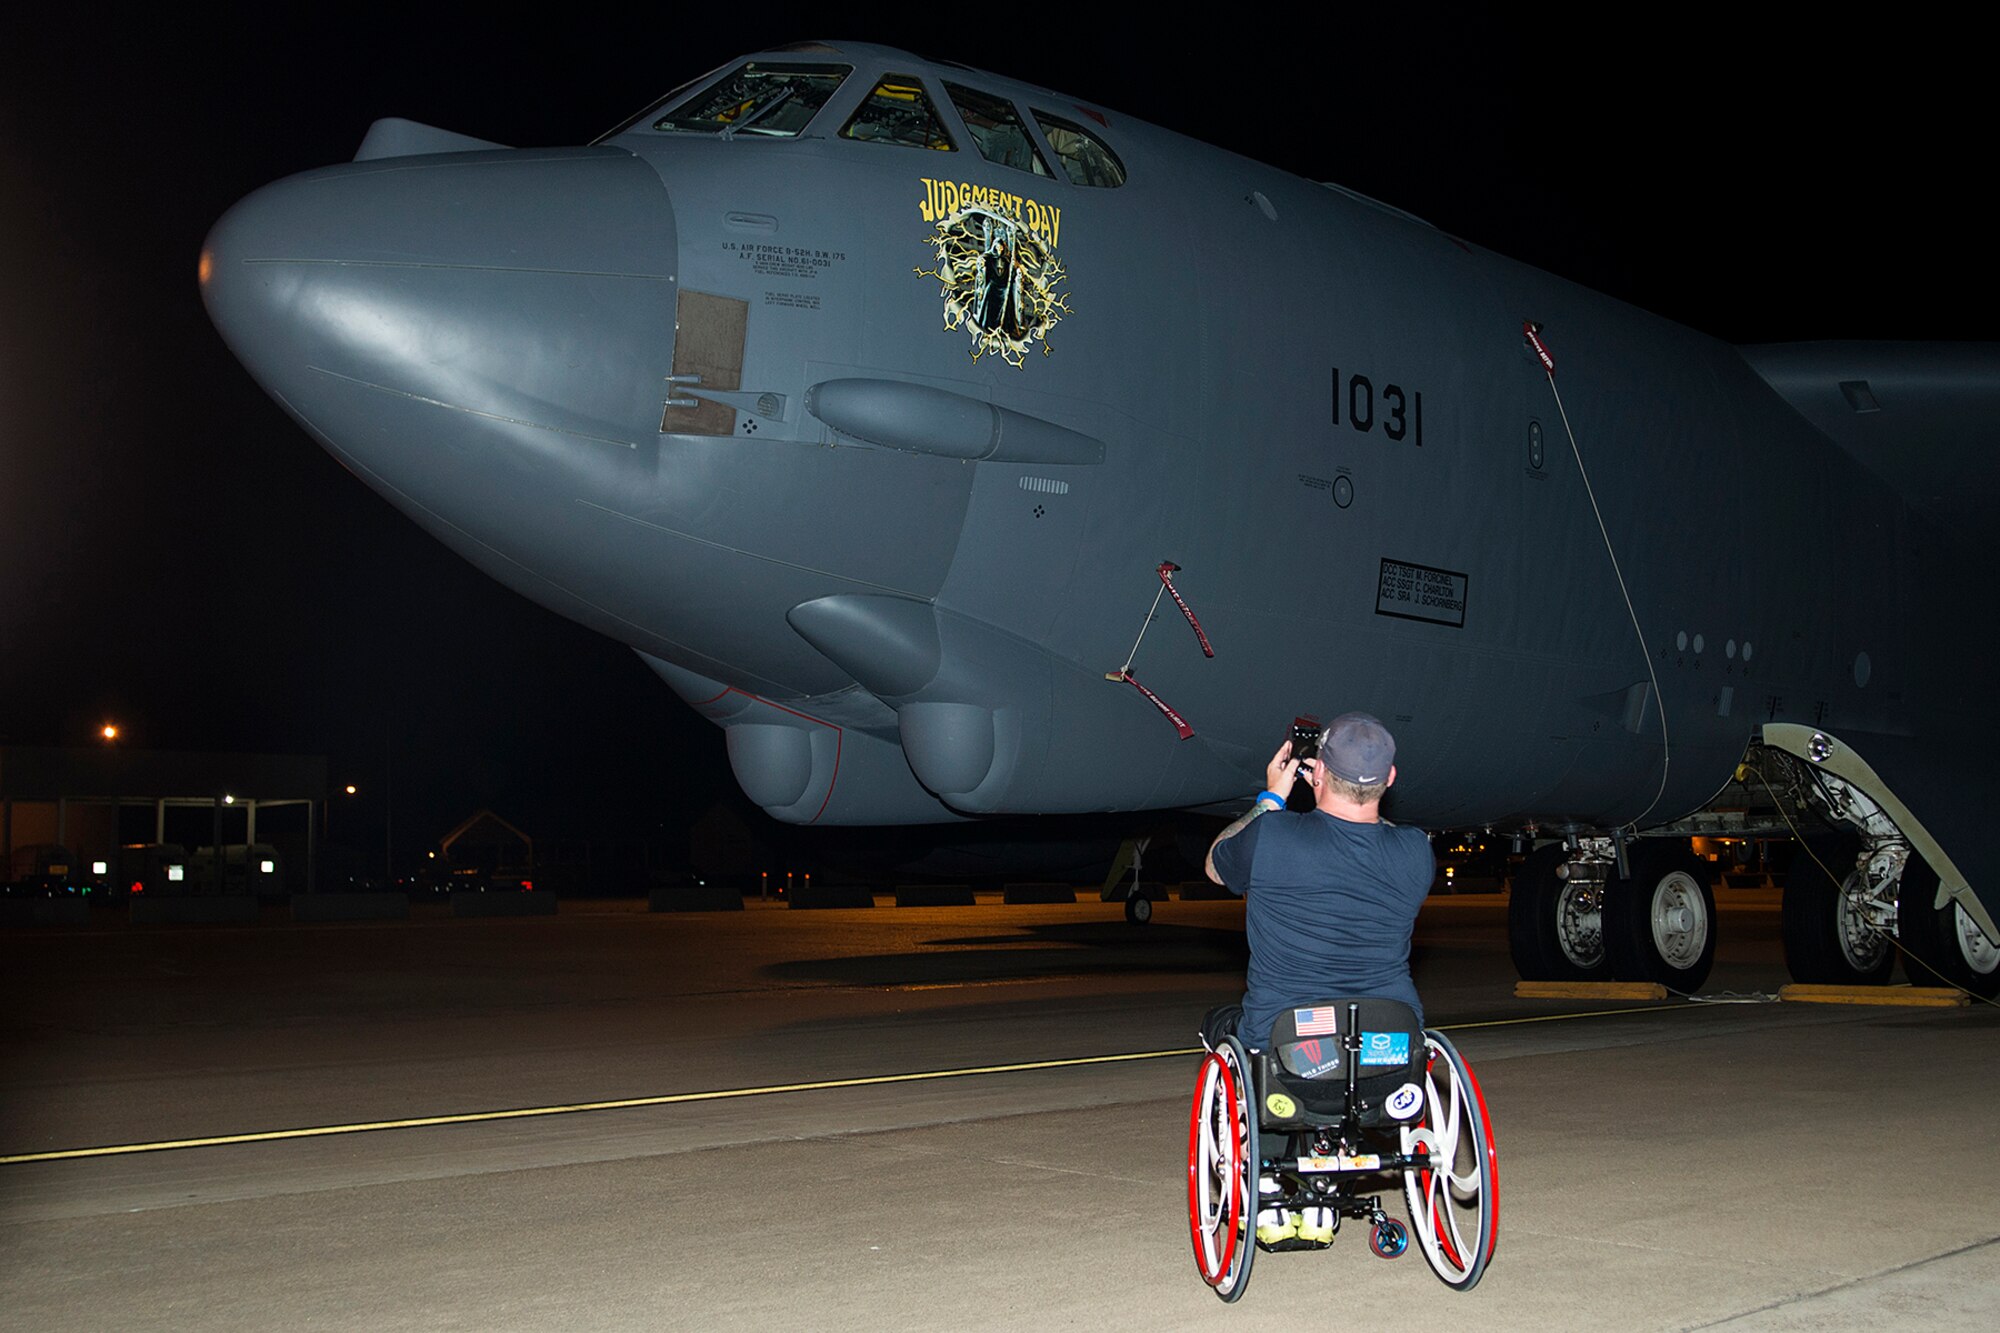 Patrick McDonald takes a photo of a 307th Bomb Wing B-52H Stratofortress after his successful entry and exit from the cockpit during a tour, June 4, 2014, Barksdale Air Force Base, La. McDonald, a U.S. Army veteran and U.S. Paralympic Curling Team captain, joined the American300 Tours to share his experience with fellow military service members as part of the tour's 'Never Quit Series'. (U.S. Air Force photo by Master Sgt. Greg Steele/Released)